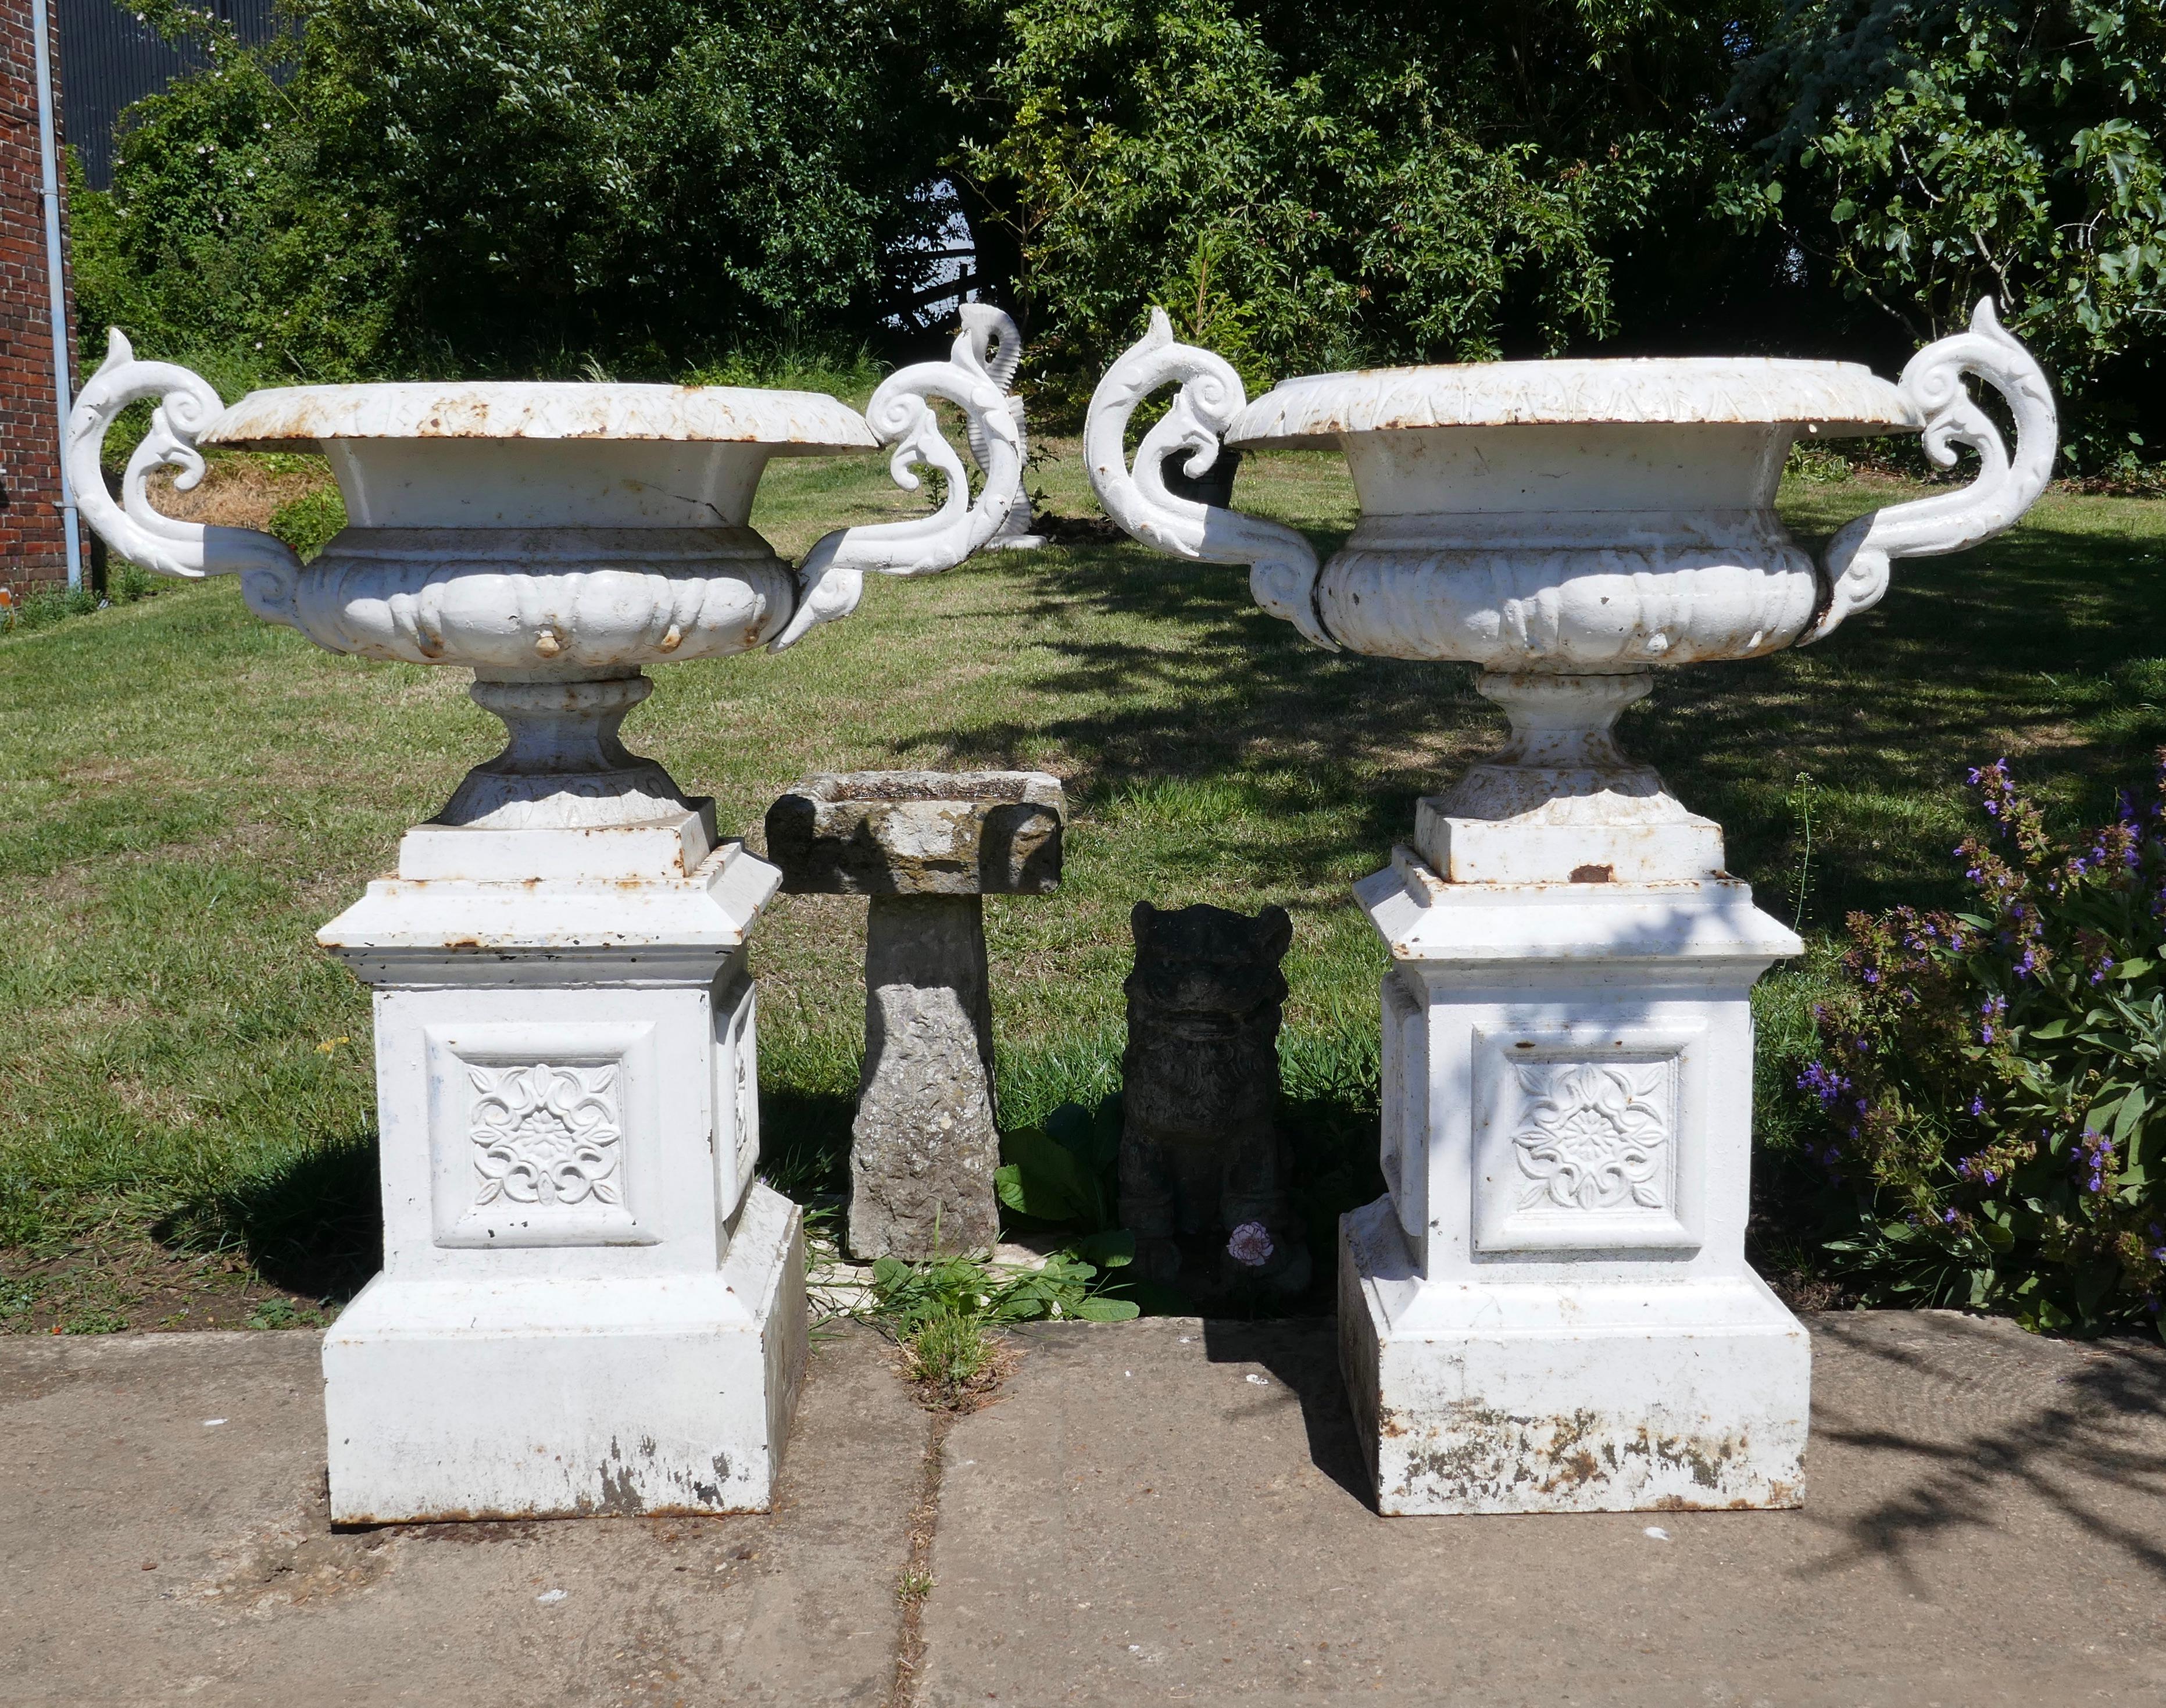 Pair of very large Victorian cast iron garden urns, garden planters

This is a superb and unusually large pair of cast iron urns 
The urns are in good condition for their age, still very sound although they are weather worn and slightly rusty